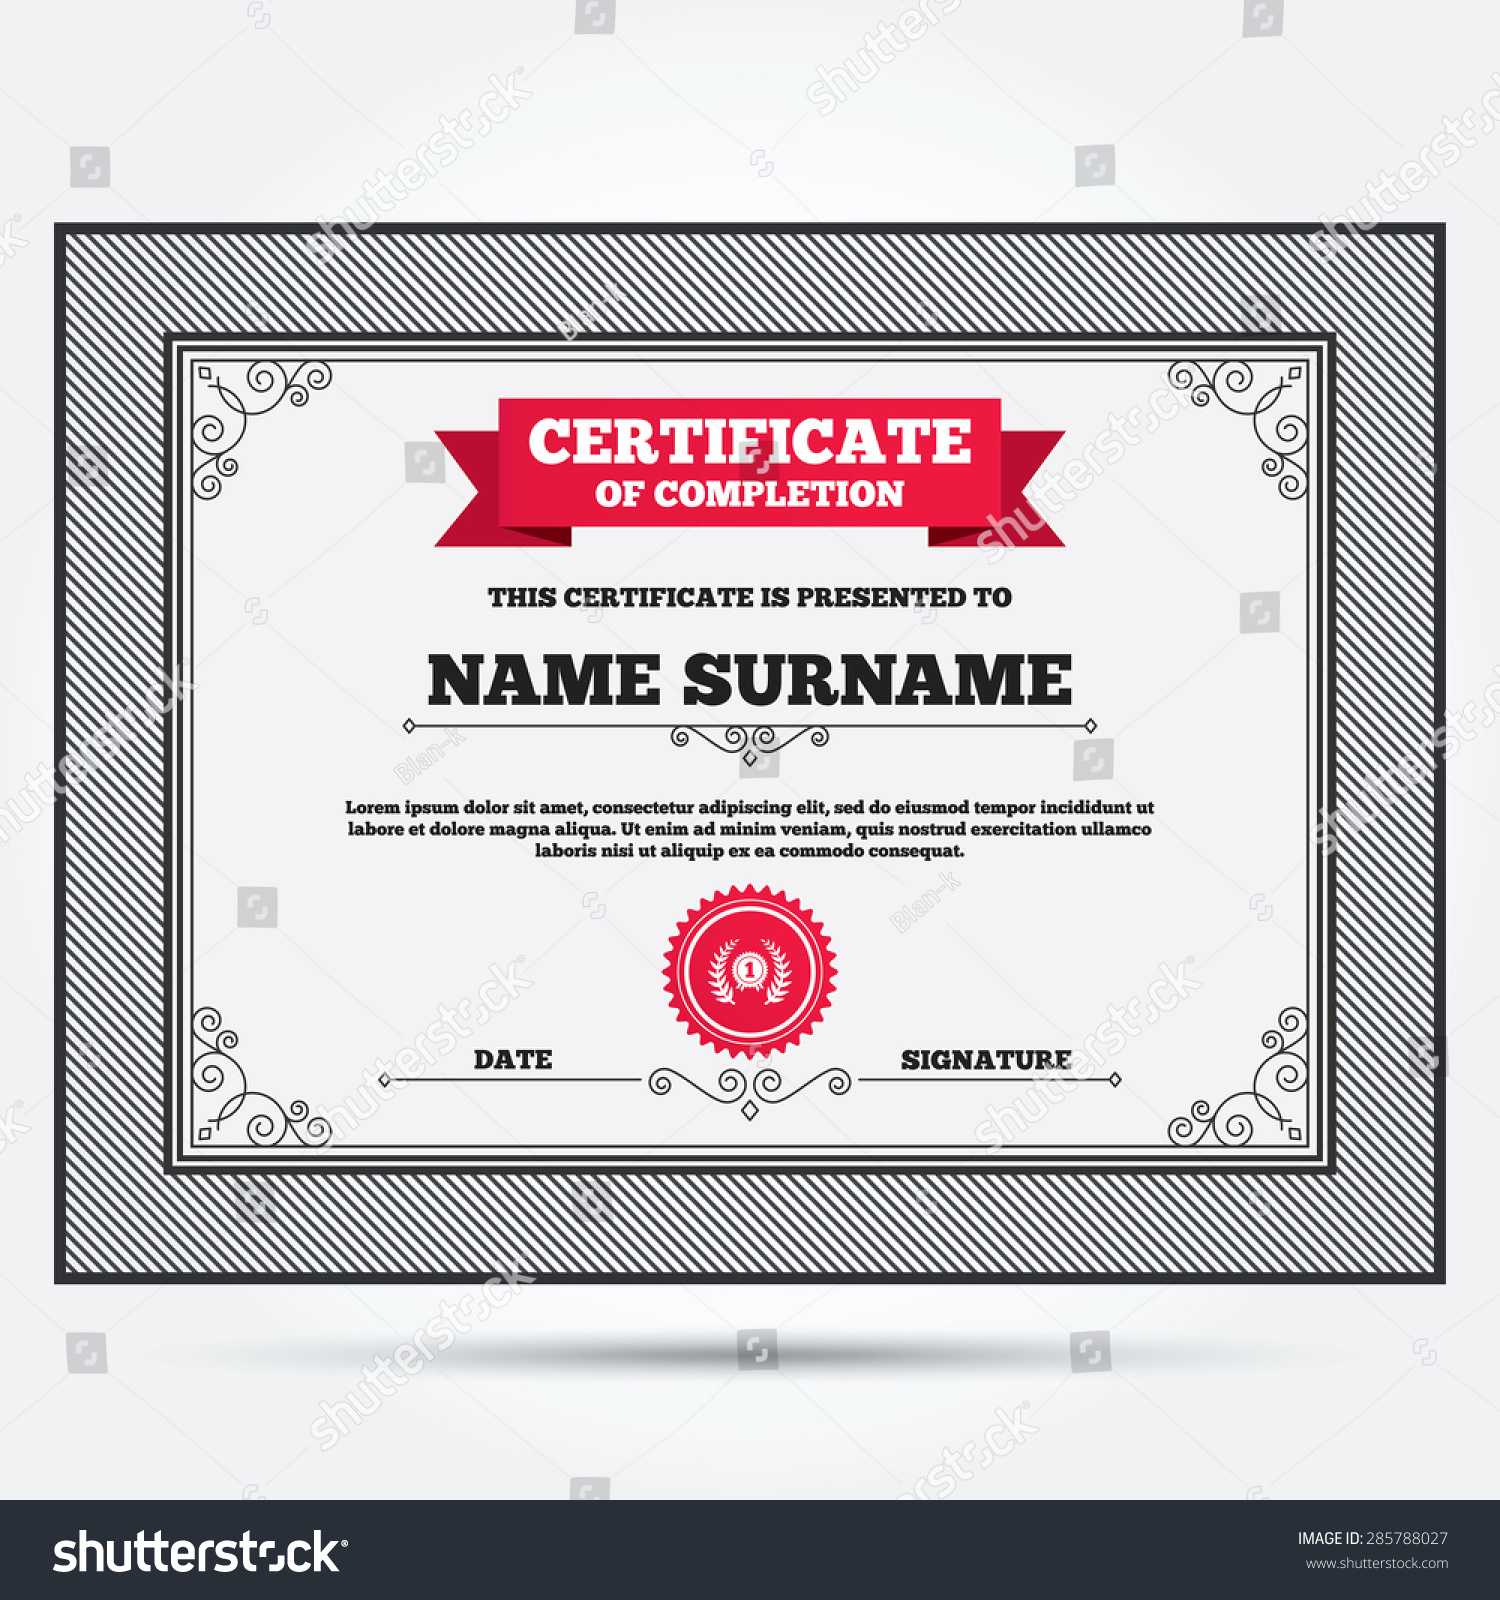 Certificate Completion First Place Award Sign Stock Vector Pertaining To First Place Award Certificate Template